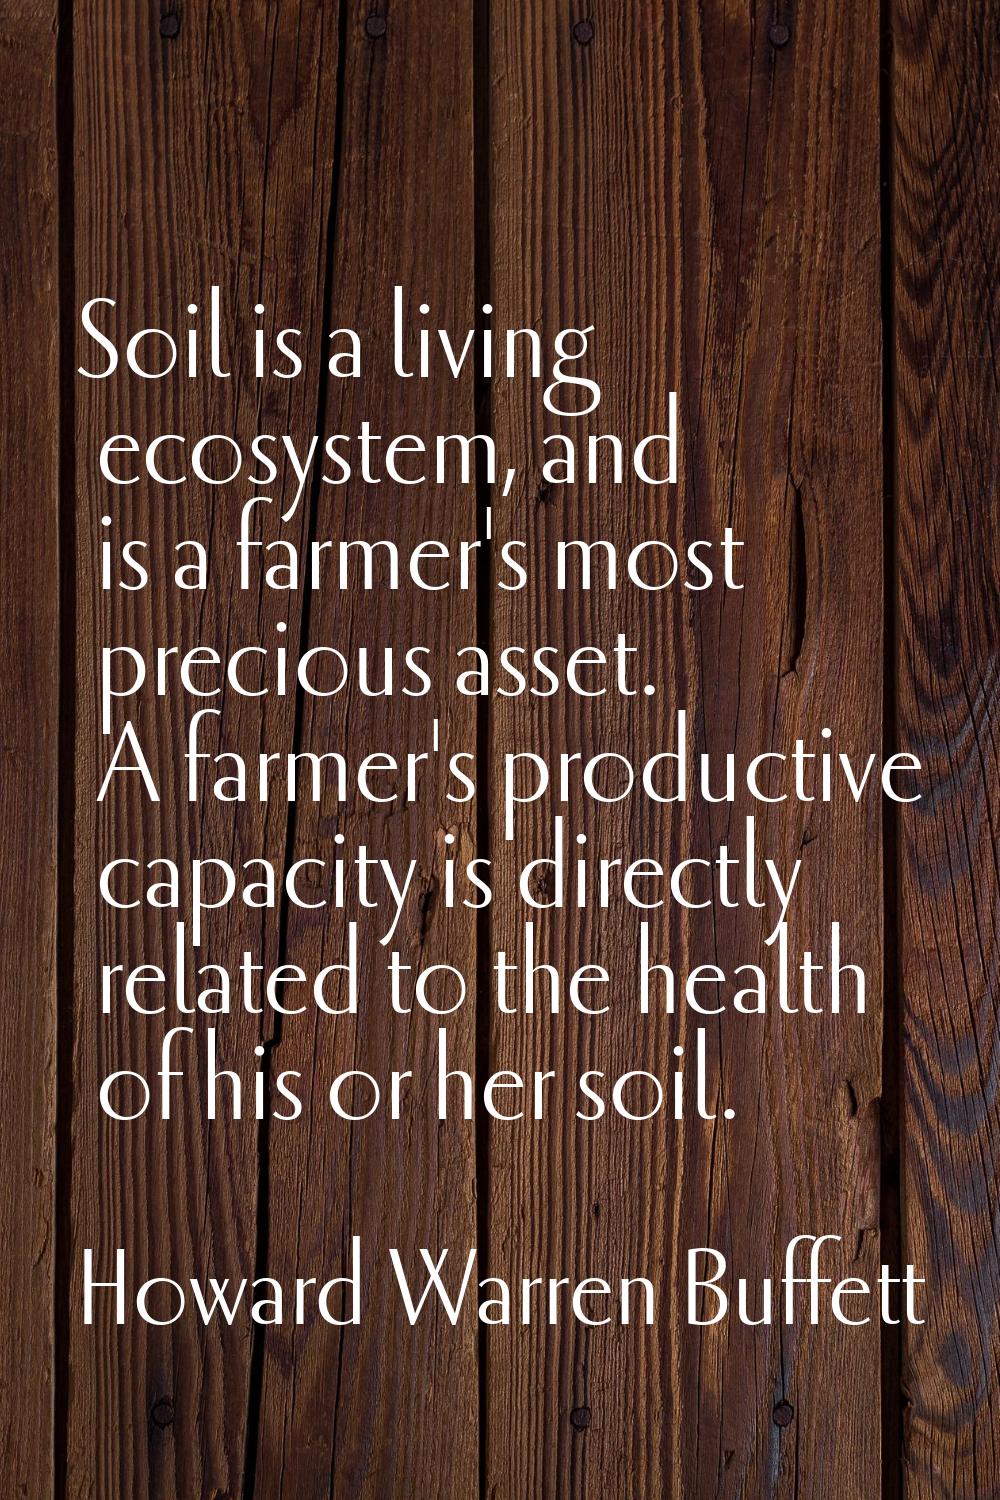 Soil is a living ecosystem, and is a farmer's most precious asset. A farmer's productive capacity i